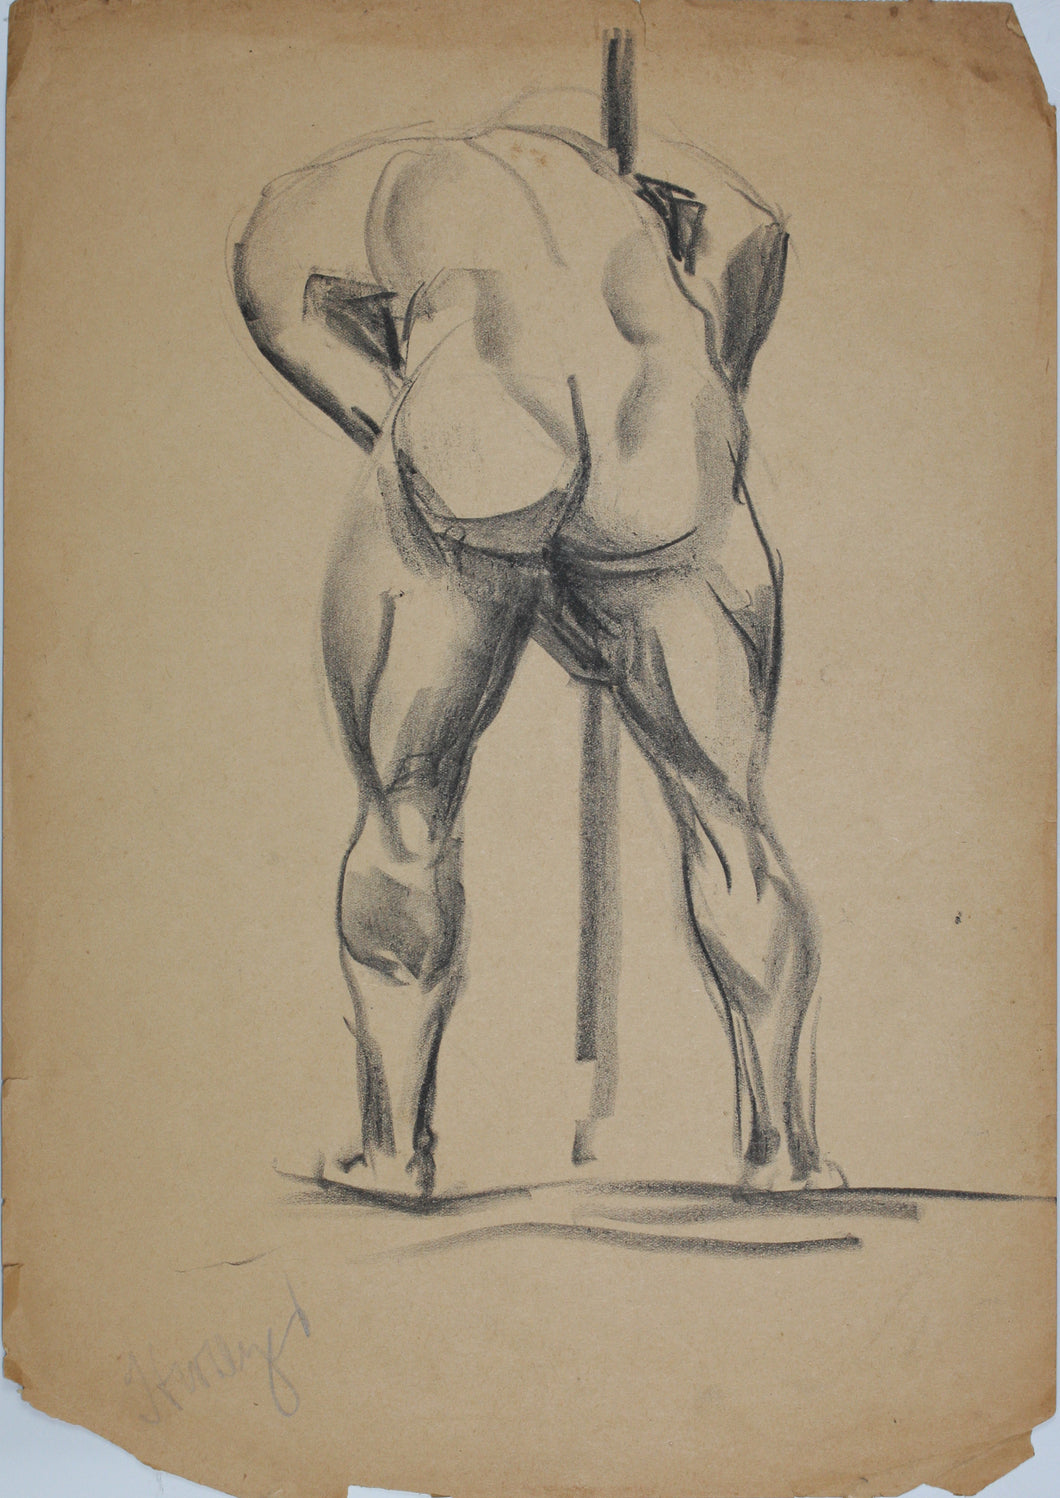 Male nude figure back view. Charcoal drawing. XX C.